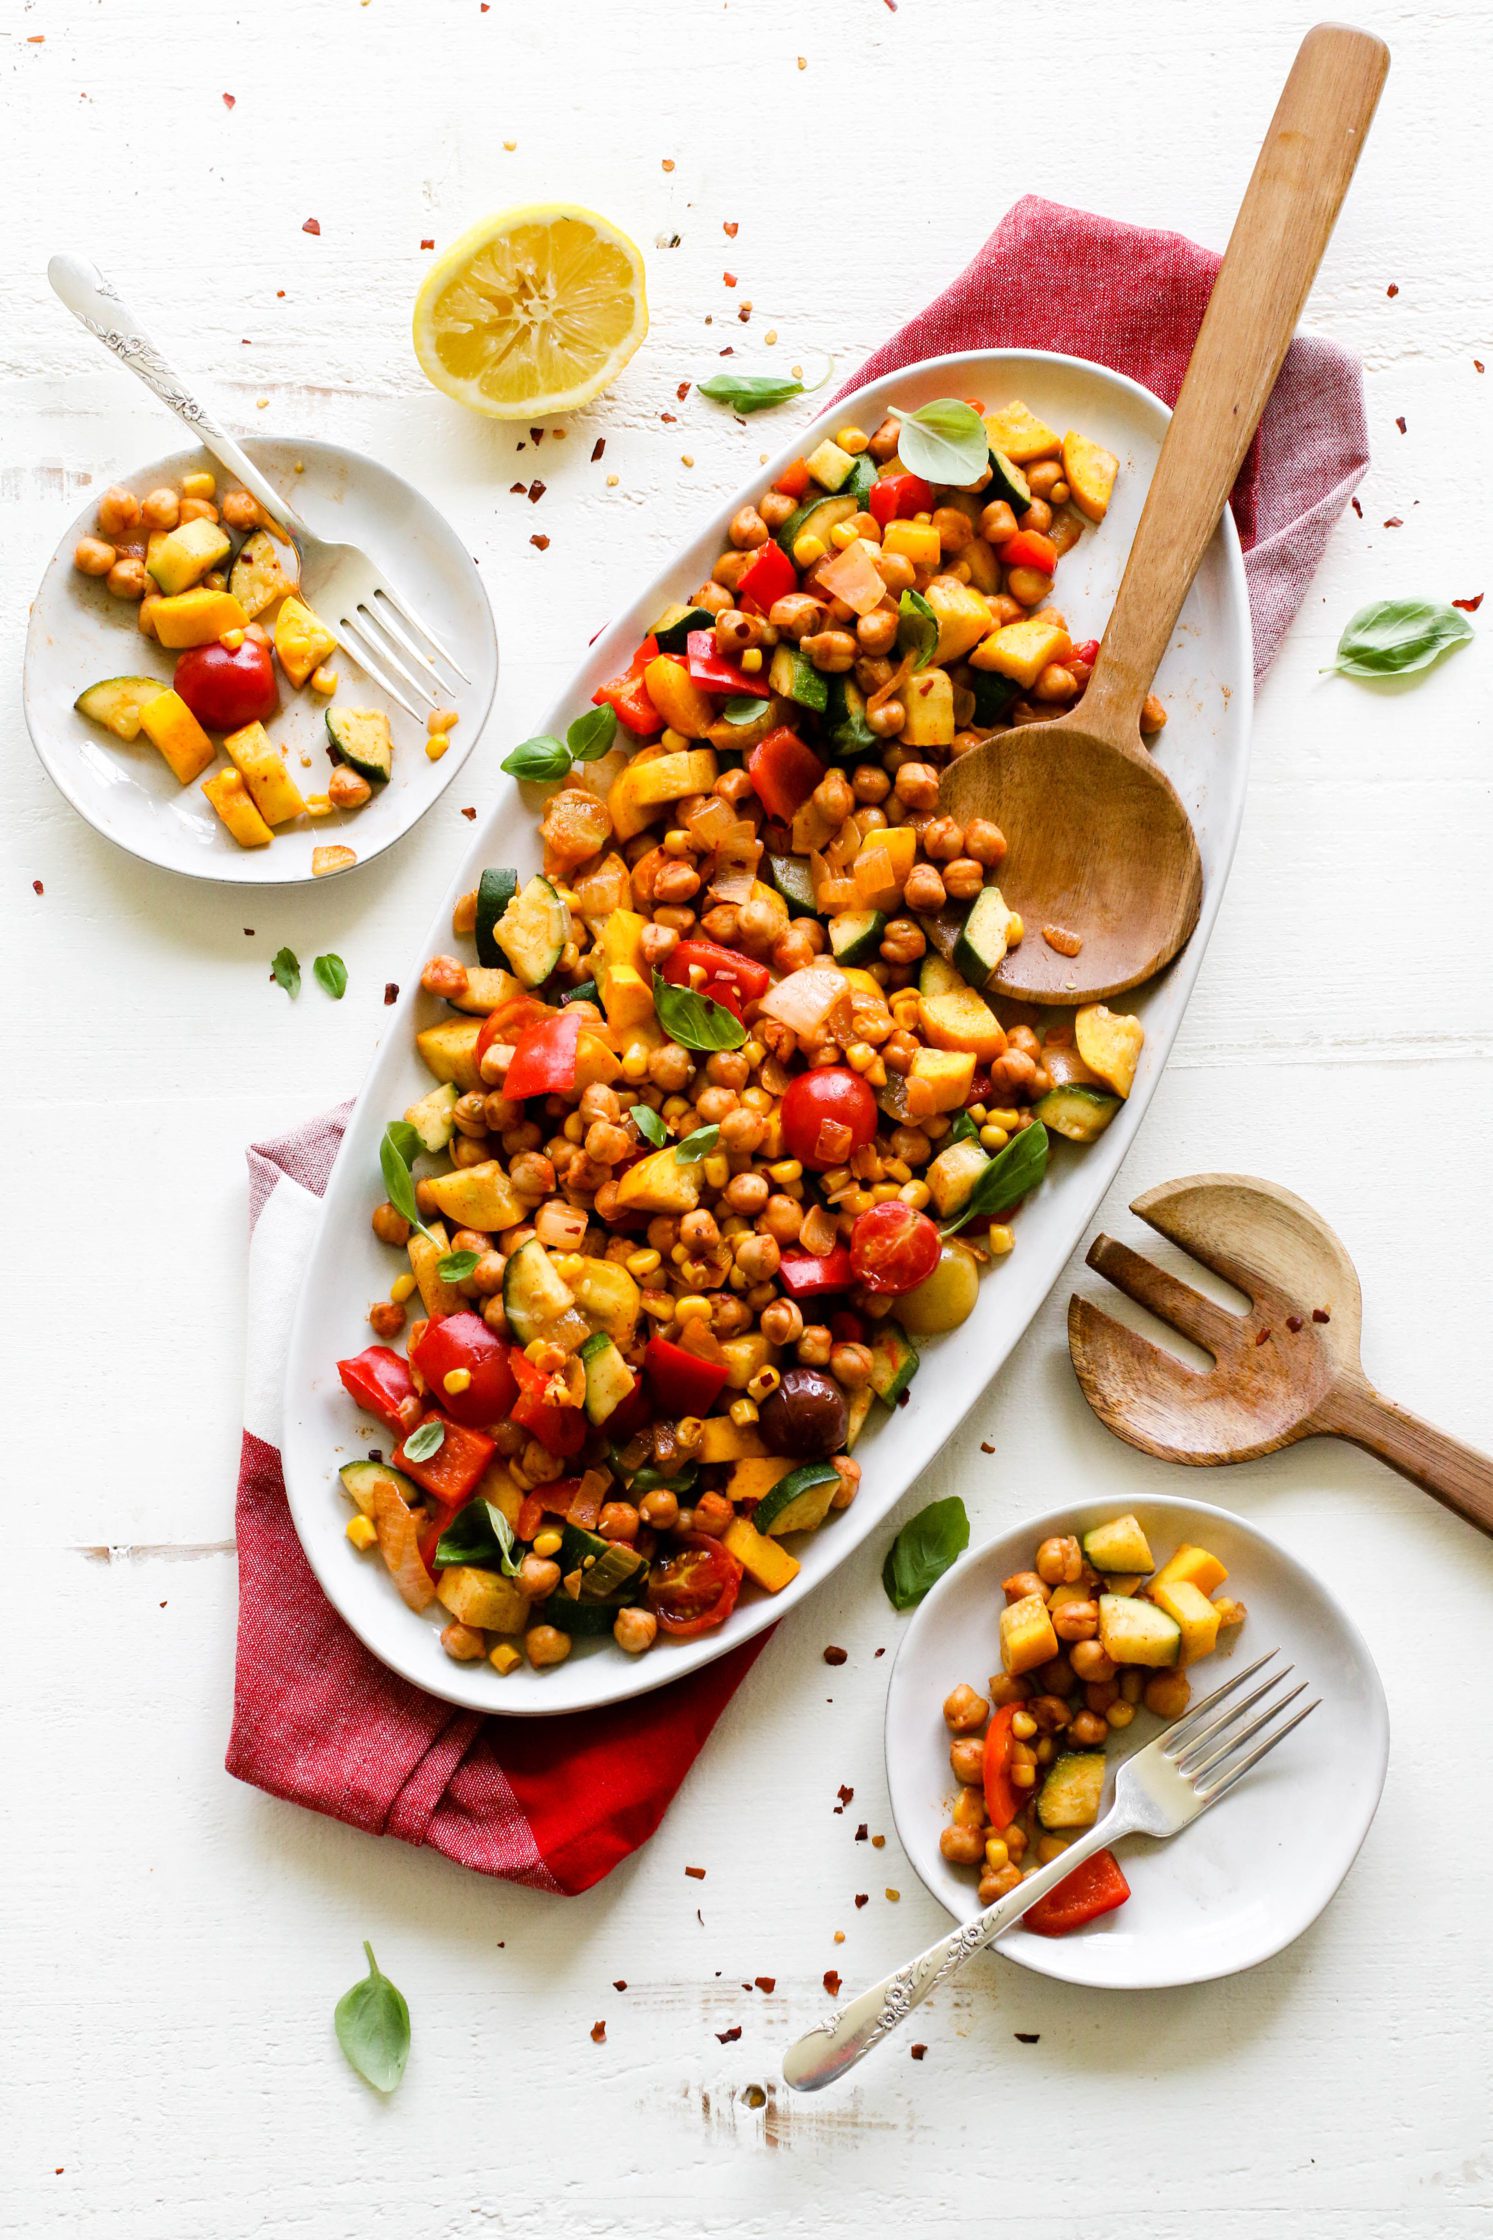 Summer Squash & Chickpea 1-Pan Meal by Flora & Vino